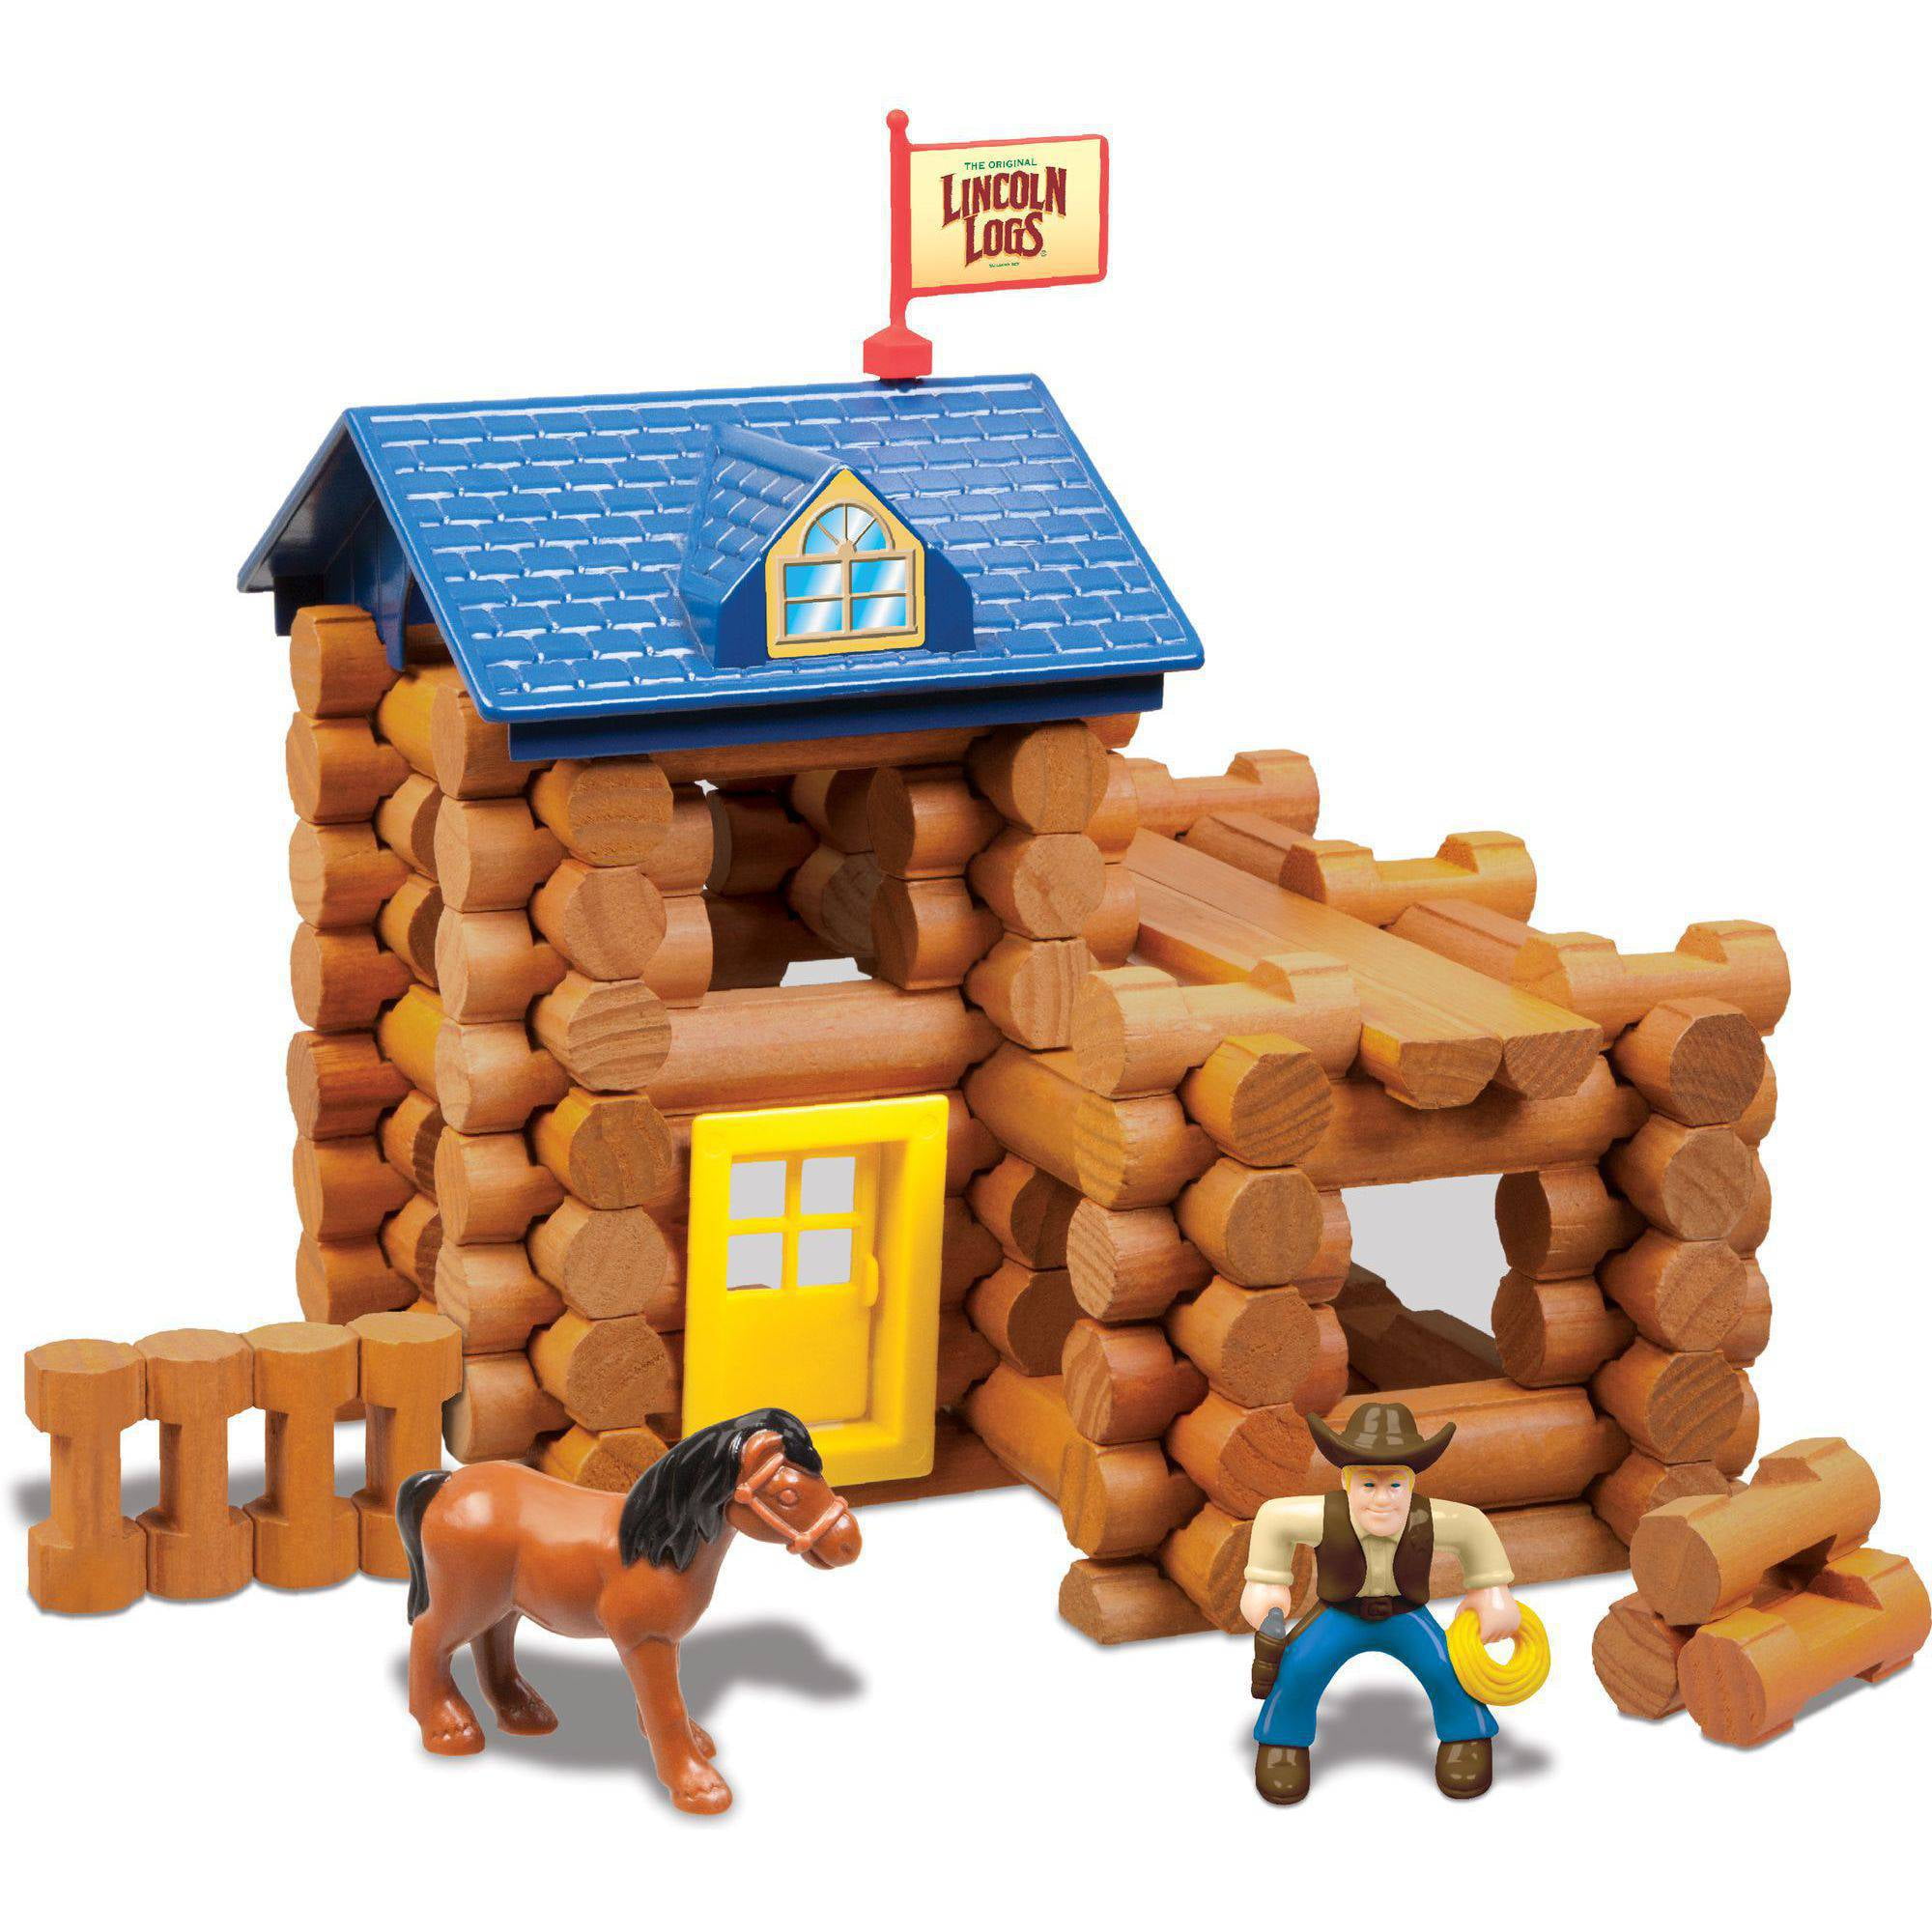 NEW Lincoln Logs Horseshoe Hill Station FREE SHIPPING!! Age 3+ 83 Piece Set 